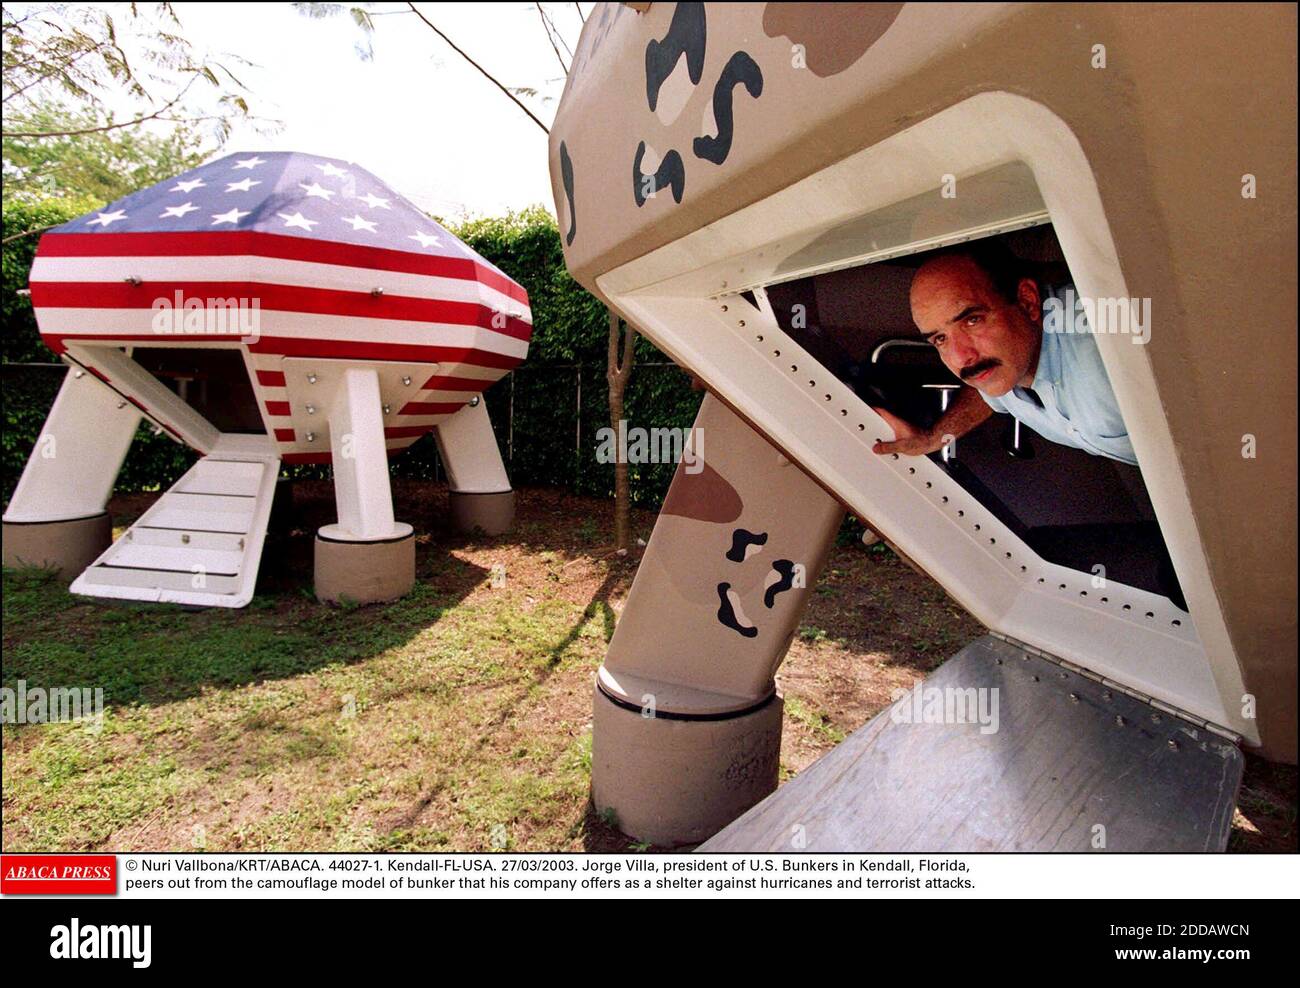 NO FILM, NO VIDEO, NO TV, NO DOCUMENTARY - © Nuri Vallbona/KRT/ABACA. 44027-1. Kendall-FL-USA. 27/03/2003. Jorge Villa, president of U.S. Bunkers in Kendall, Florida, peers out from the camouflage model of bunker that his company offers as a shelter against hurricanes and terrorist attacks. Stock Photo